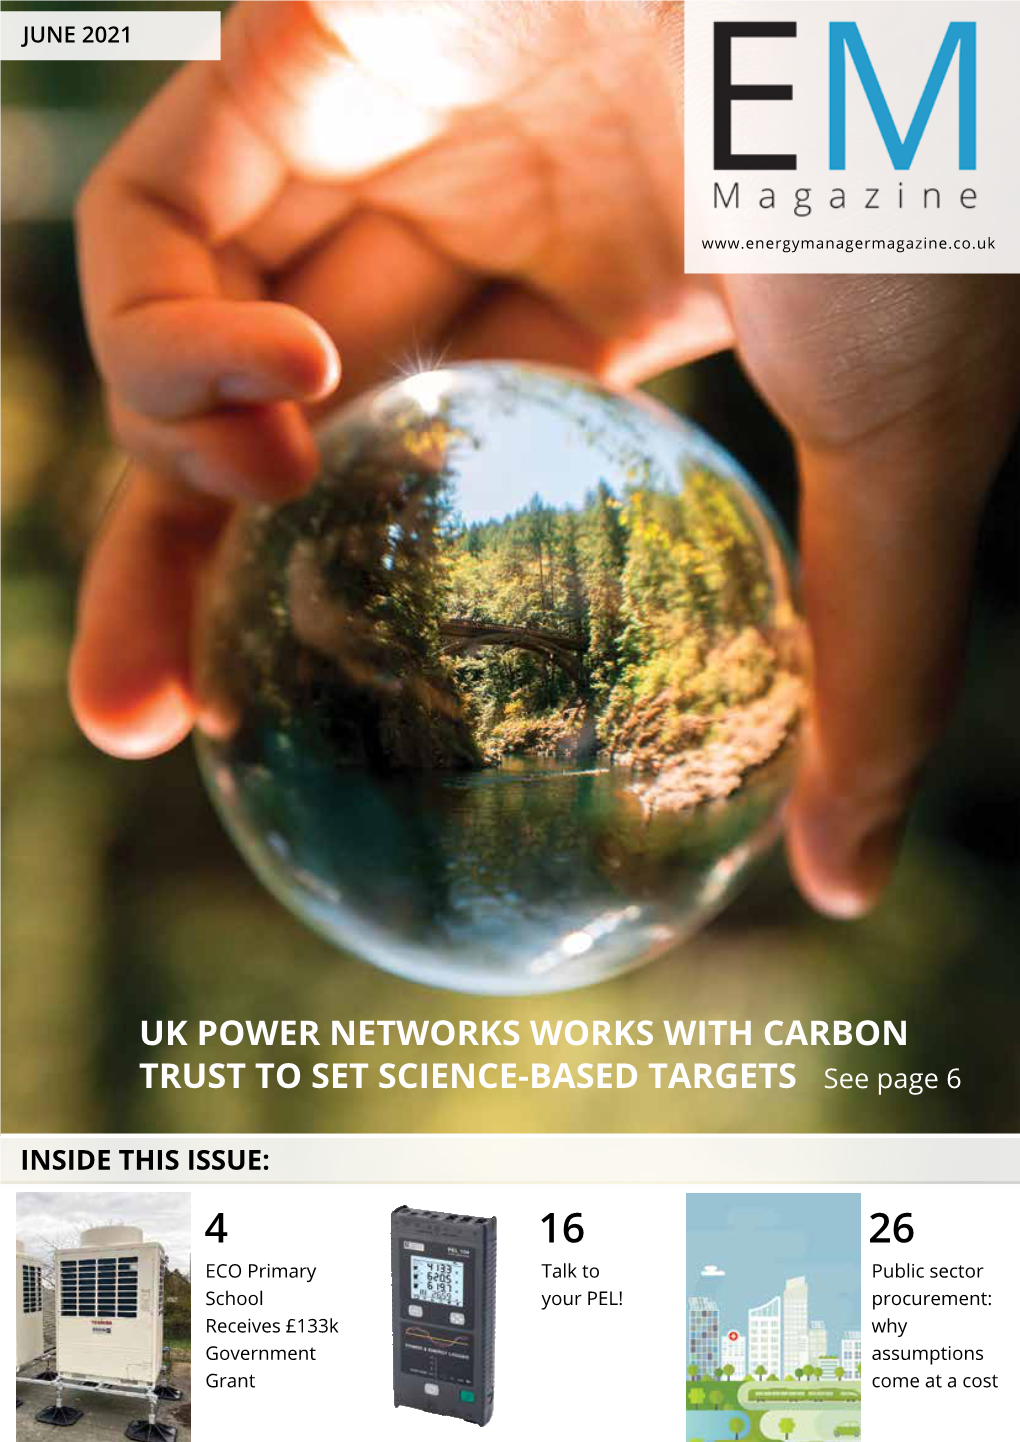 UK POWER NETWORKS WORKS with CARBON TRUST to SET SCIENCE-BASED TARGETS See Page 6